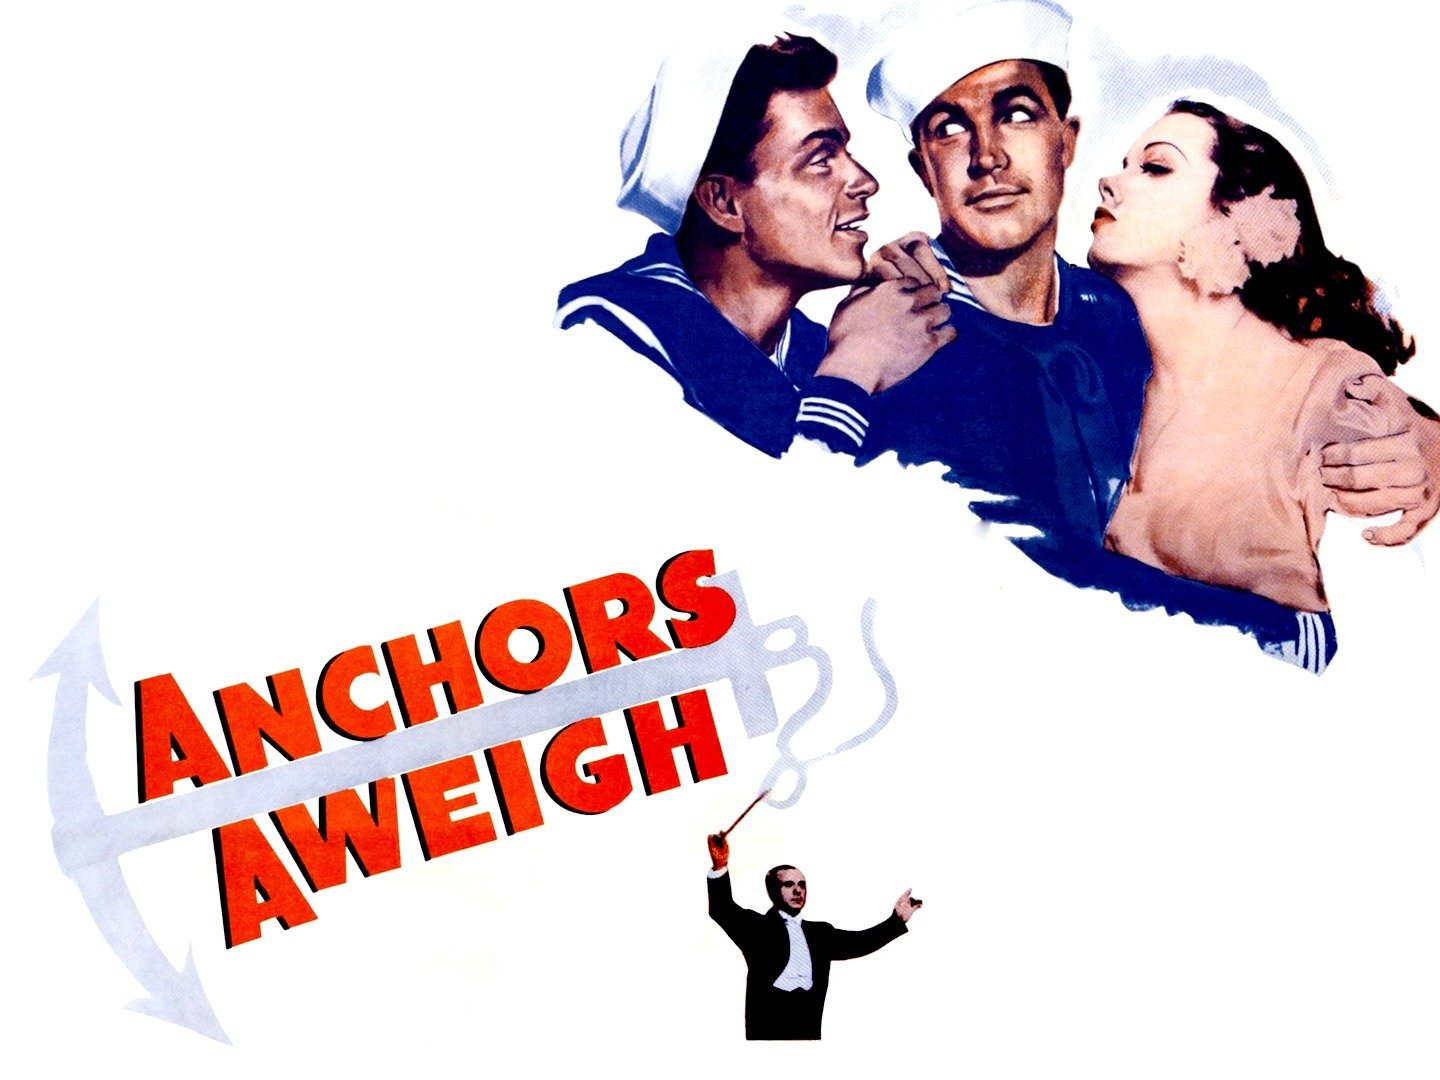 44-facts-about-the-movie-anchors-aweigh